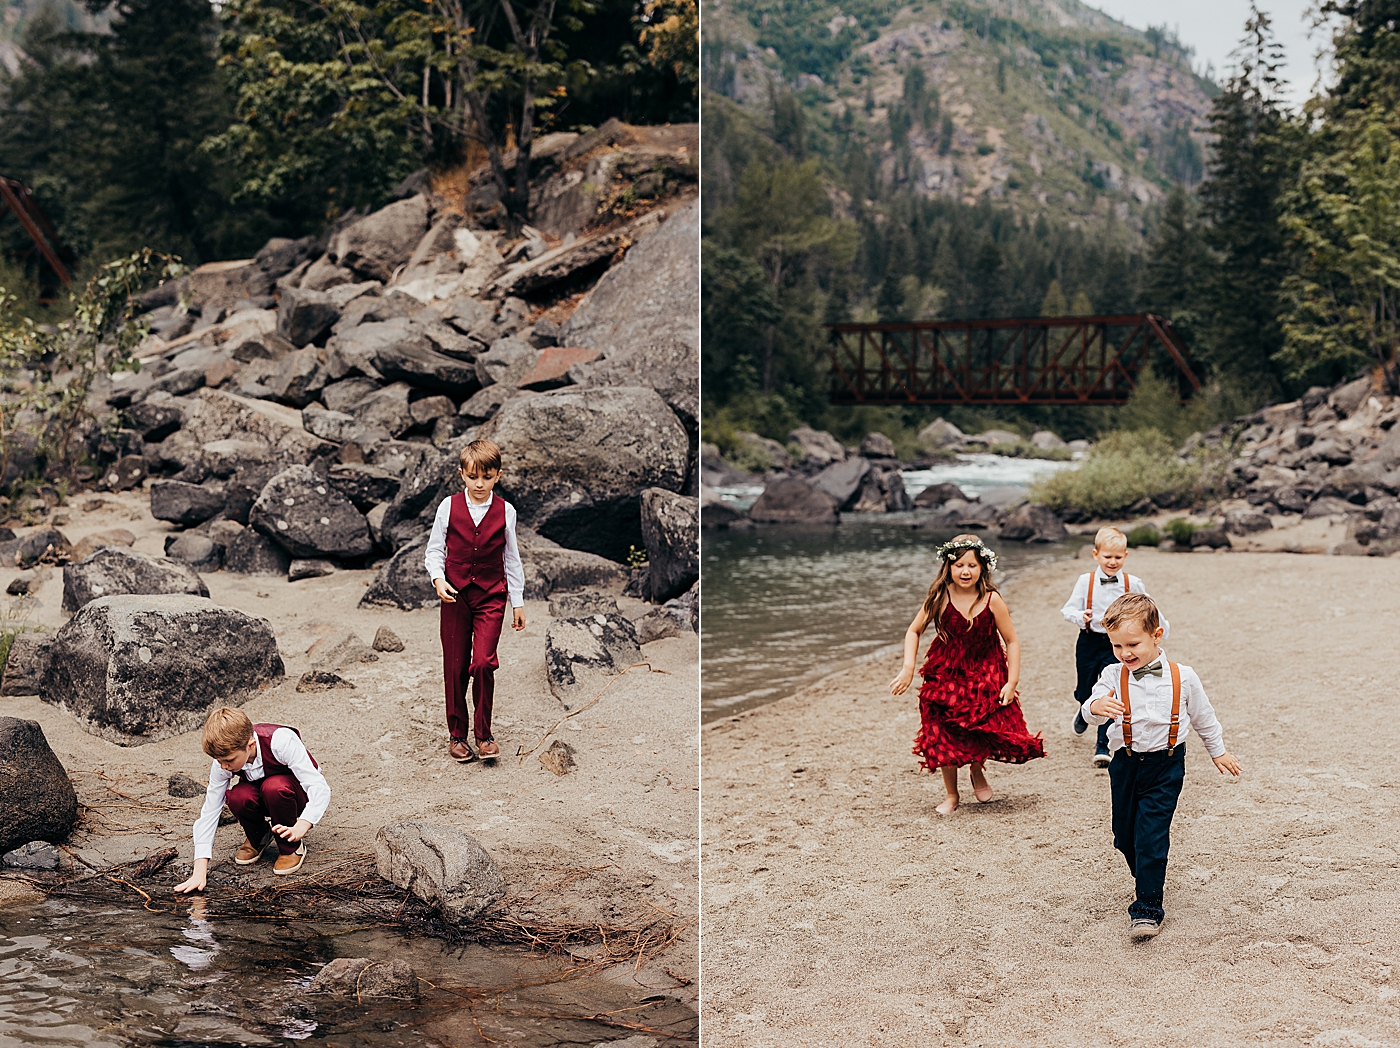 Kids playing by the water. Photo by Megan Montalvo Photography.